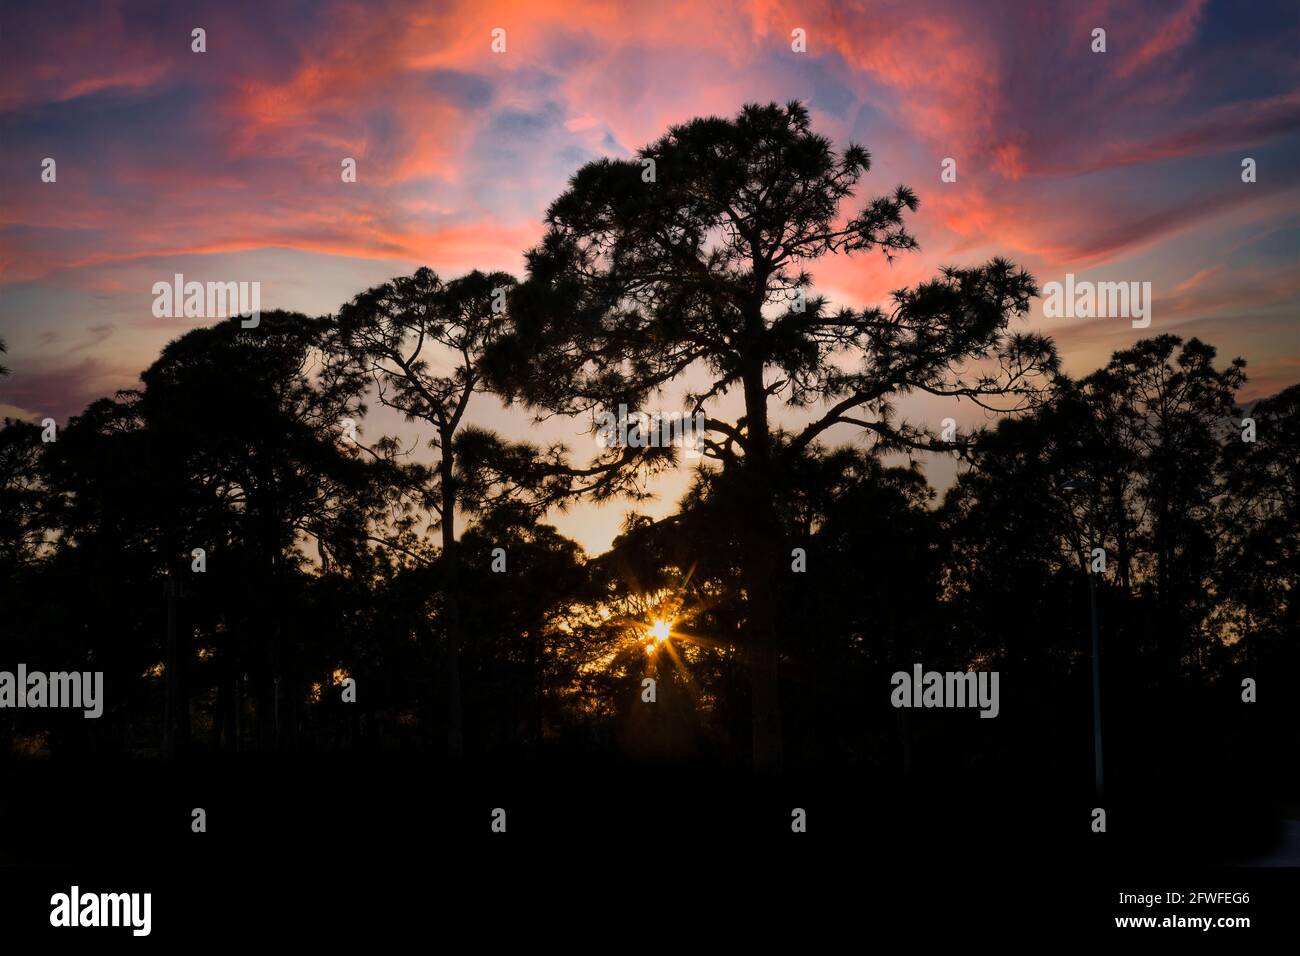 Trees silouetted aganist a colorful sunset sky in Southwest Florida USA Stock Photo